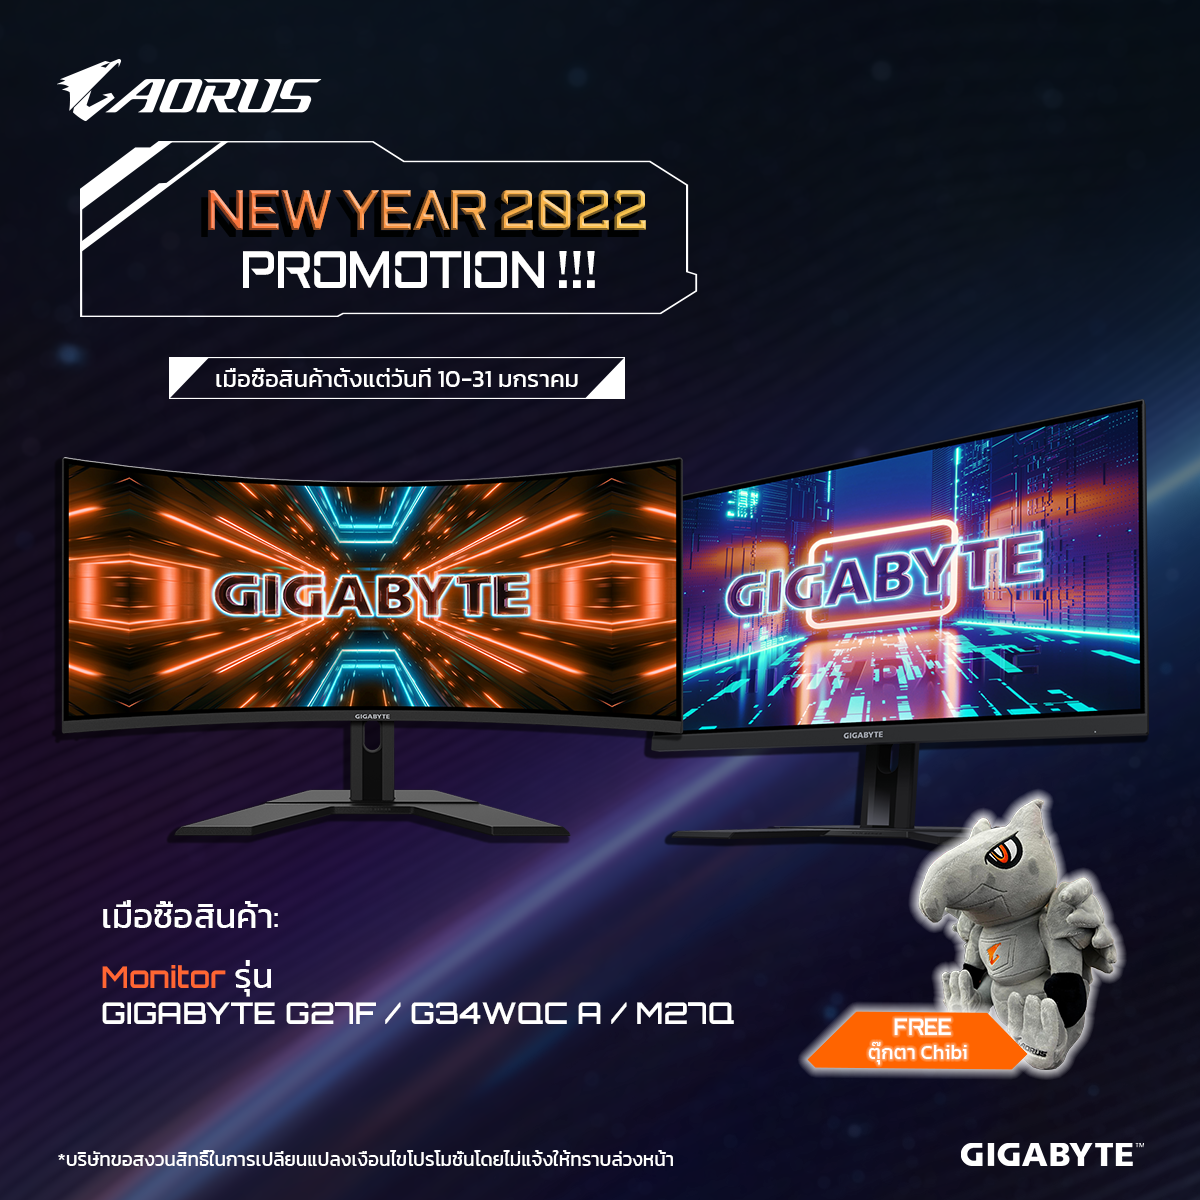 [TH] GIGABYTE AORUS NEW YEAR PROMOTION